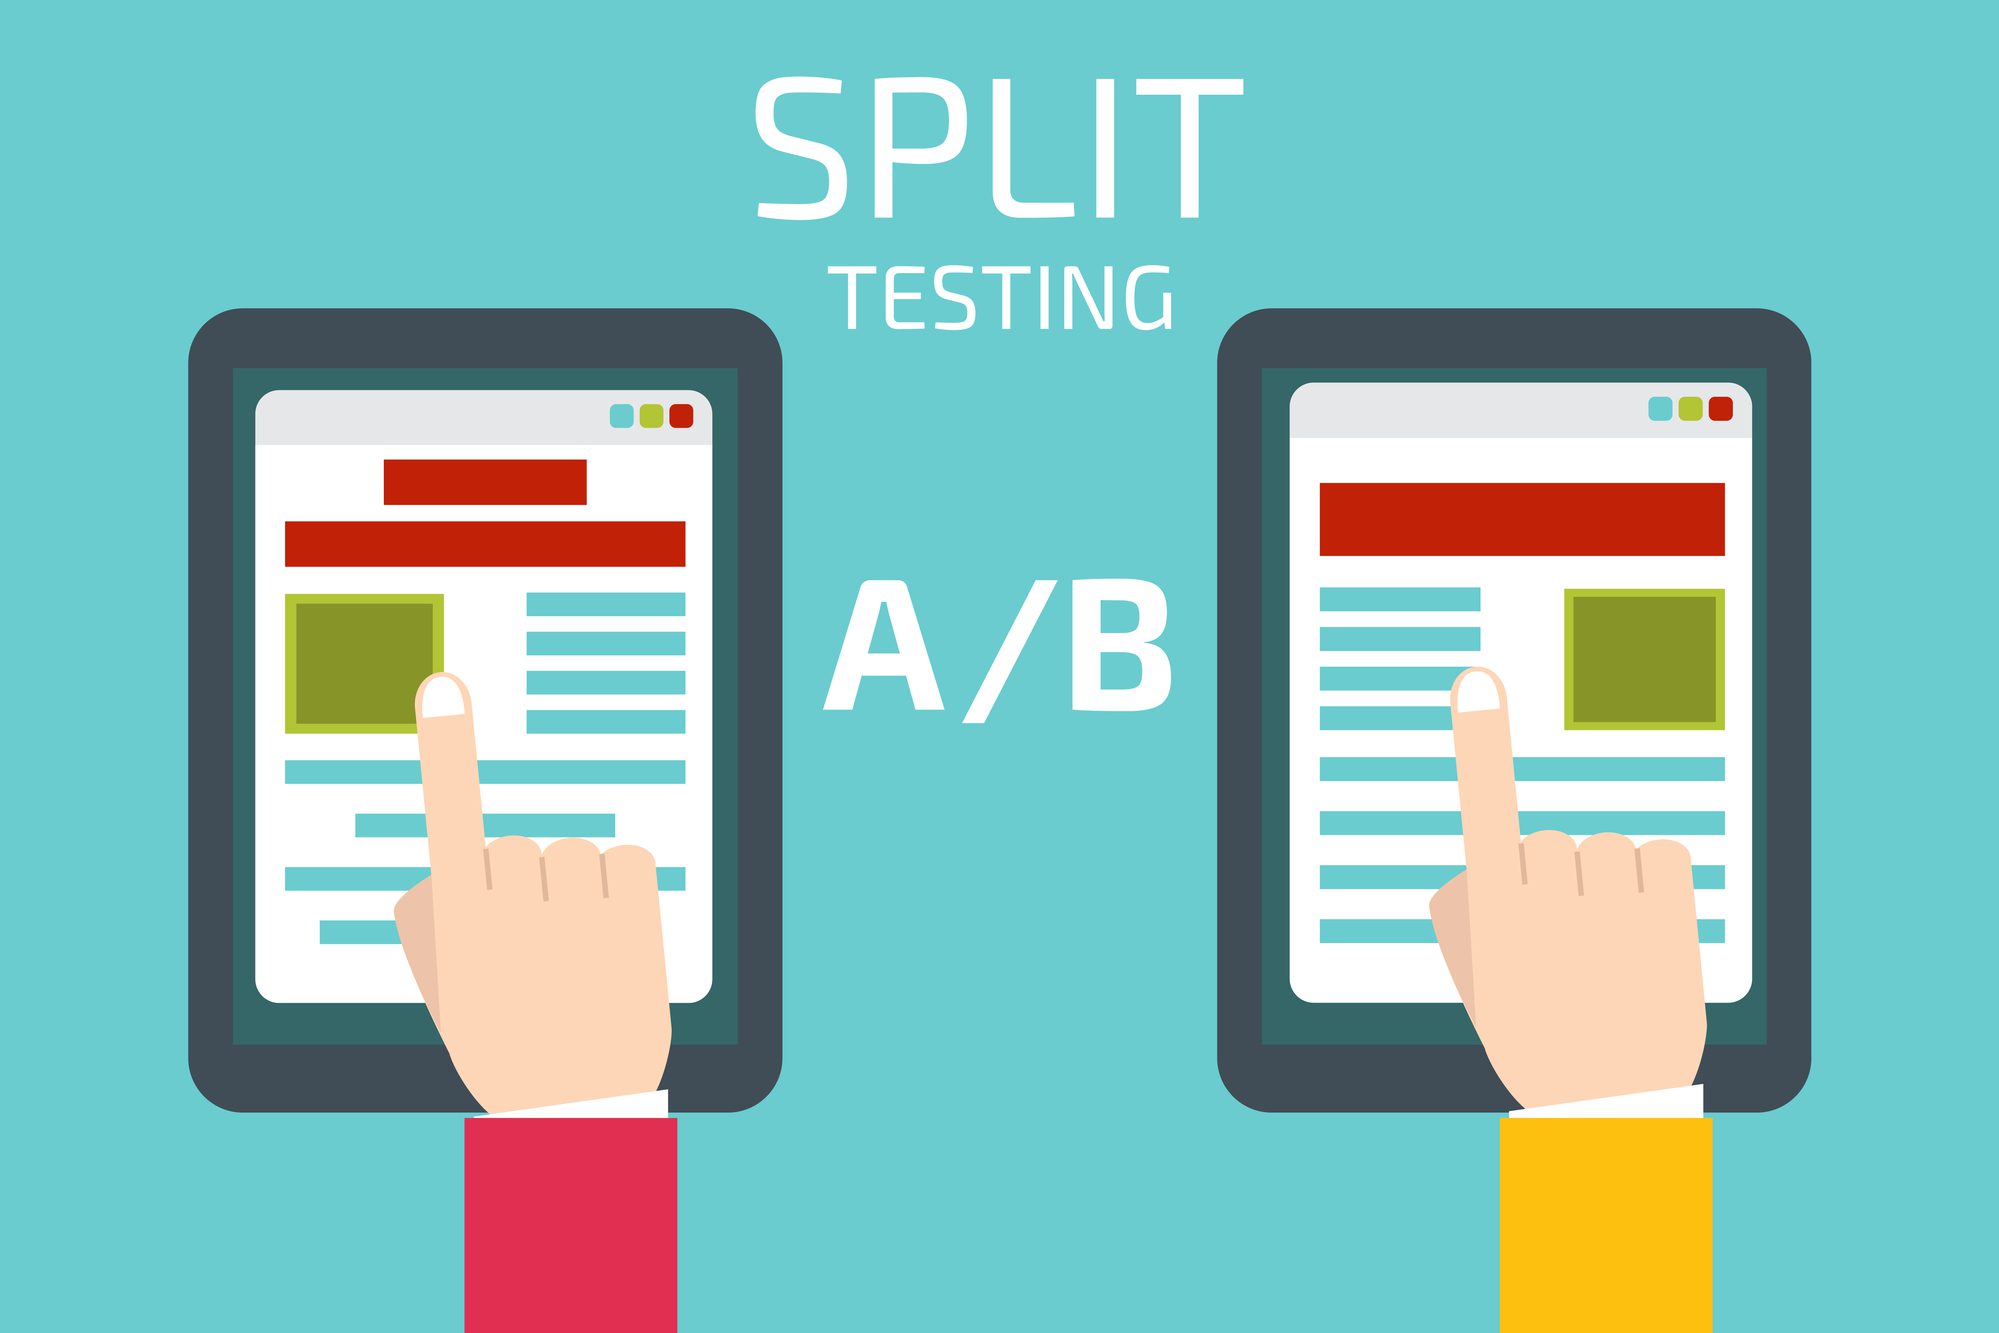 The Benefits of A/B Testing for Websites and Digital Campaigns